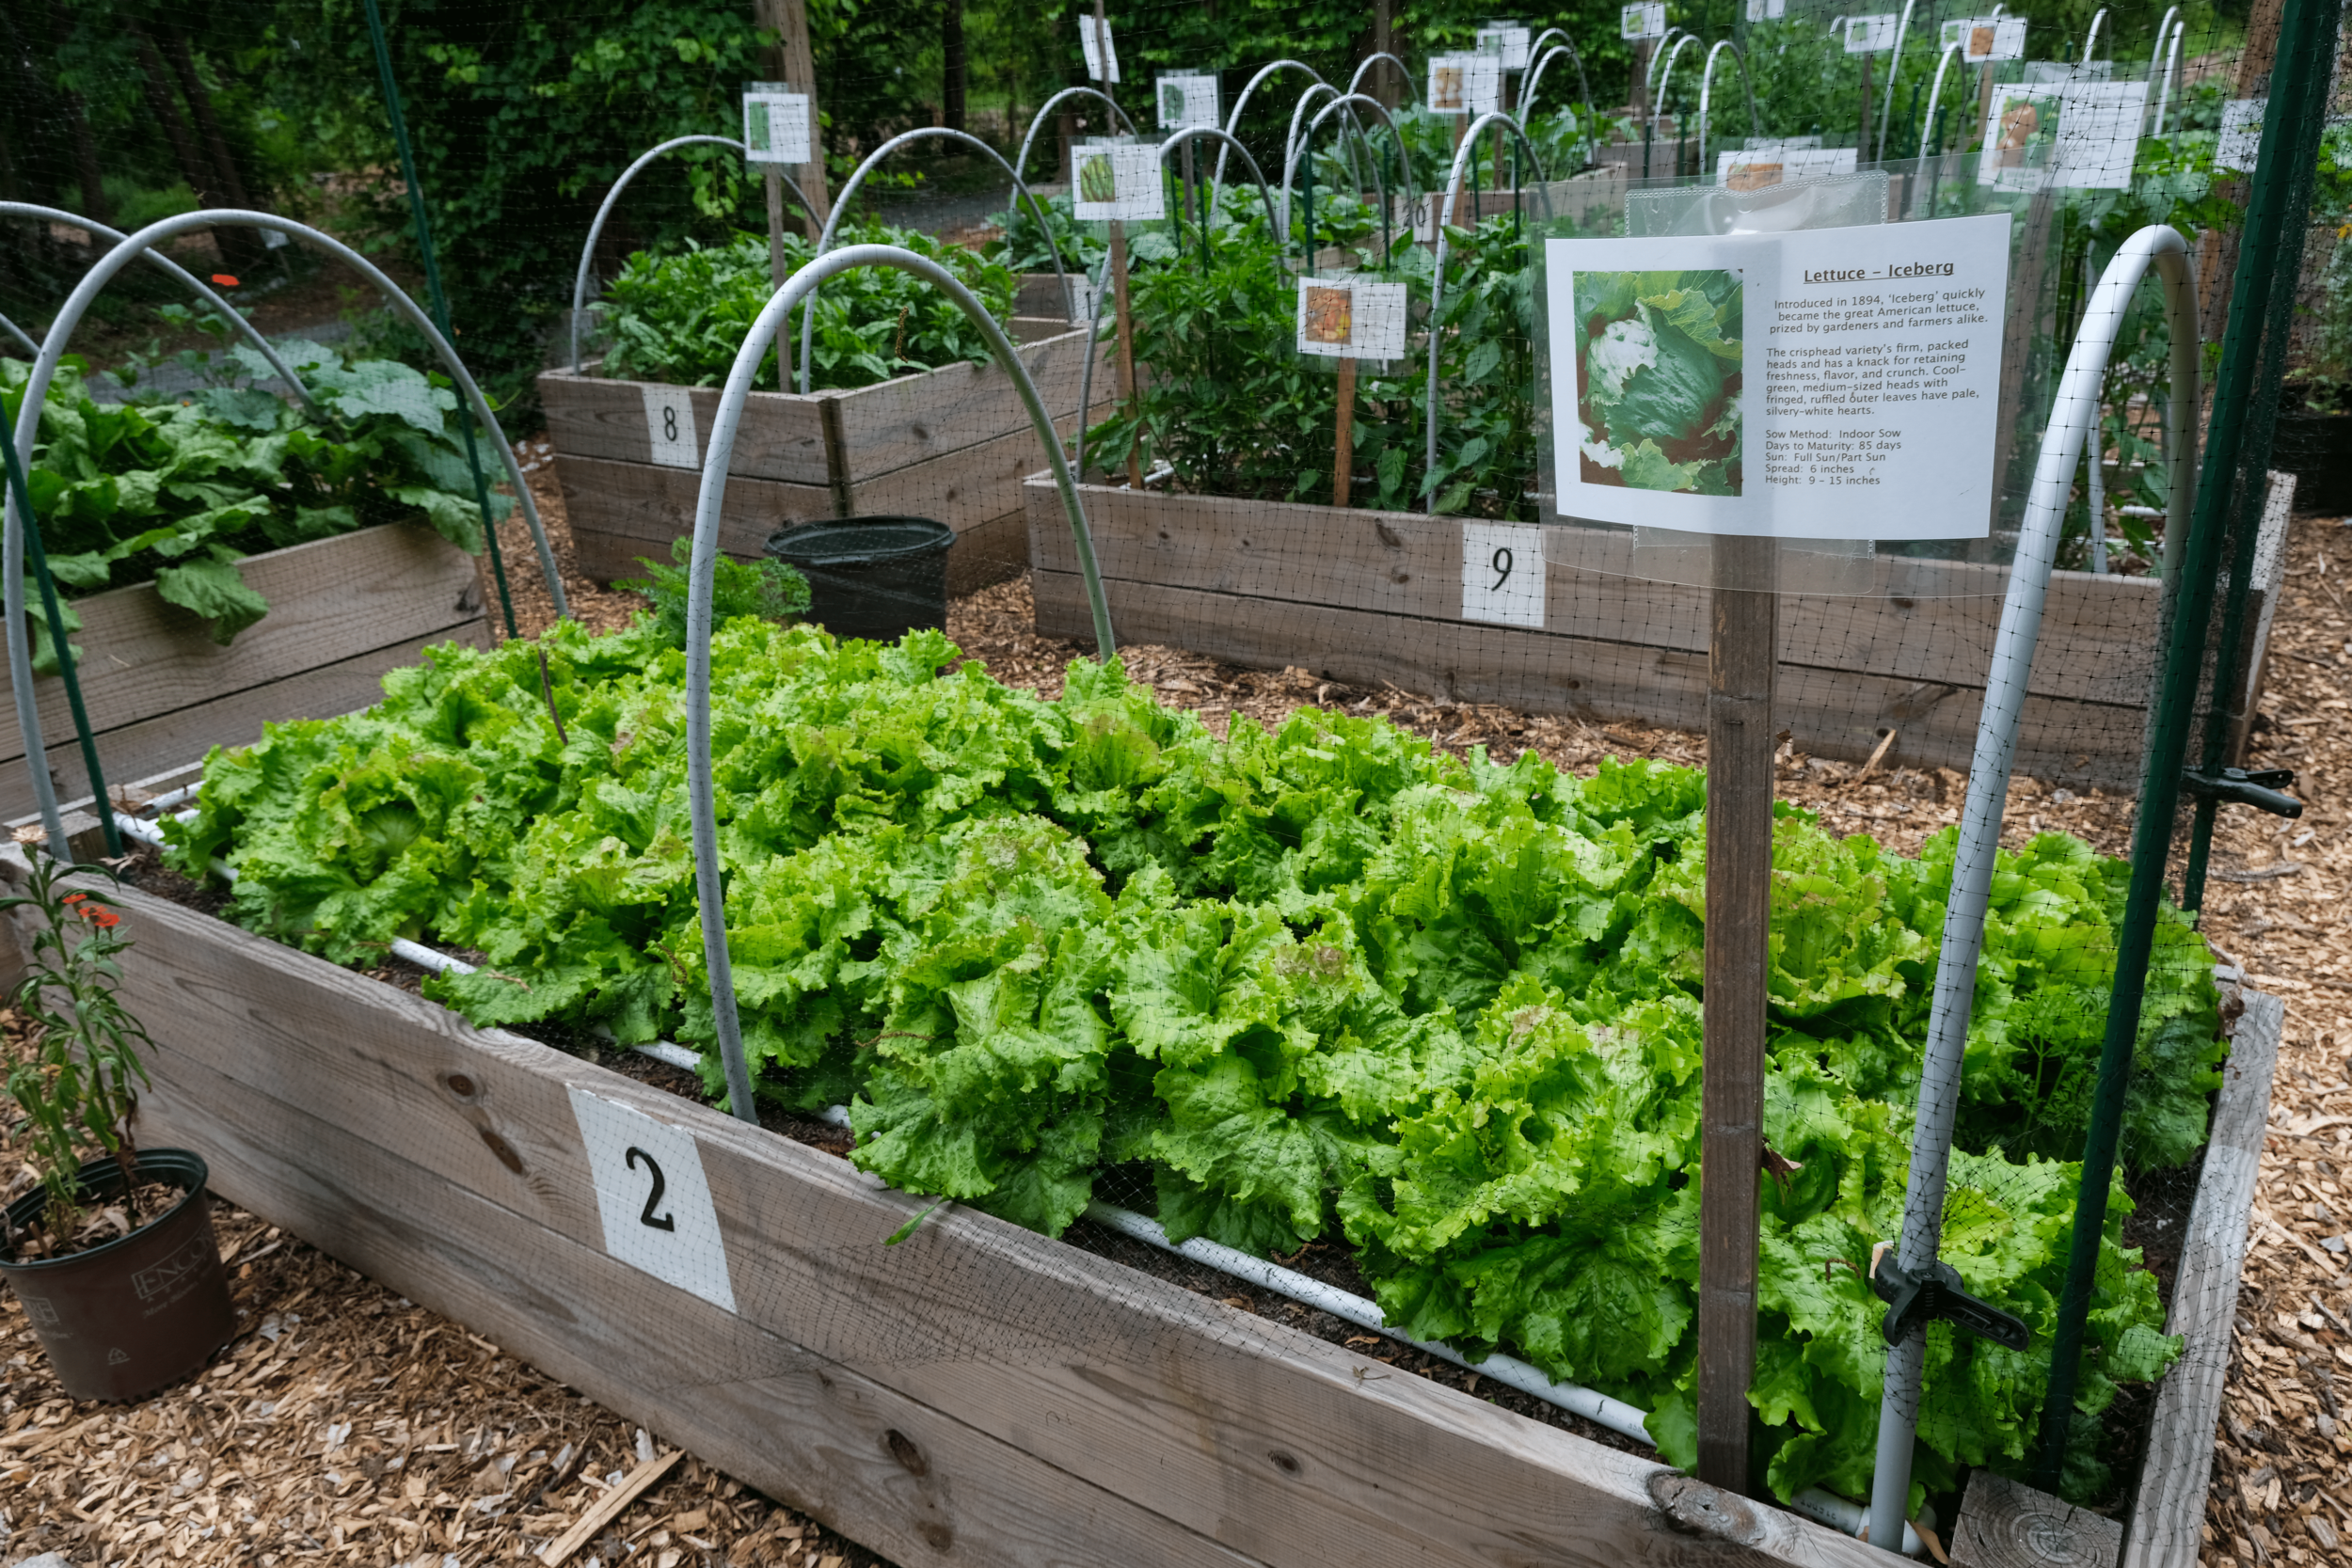 Urban Food Forest at Browns Mill; image sourced from Jeffrey Landau